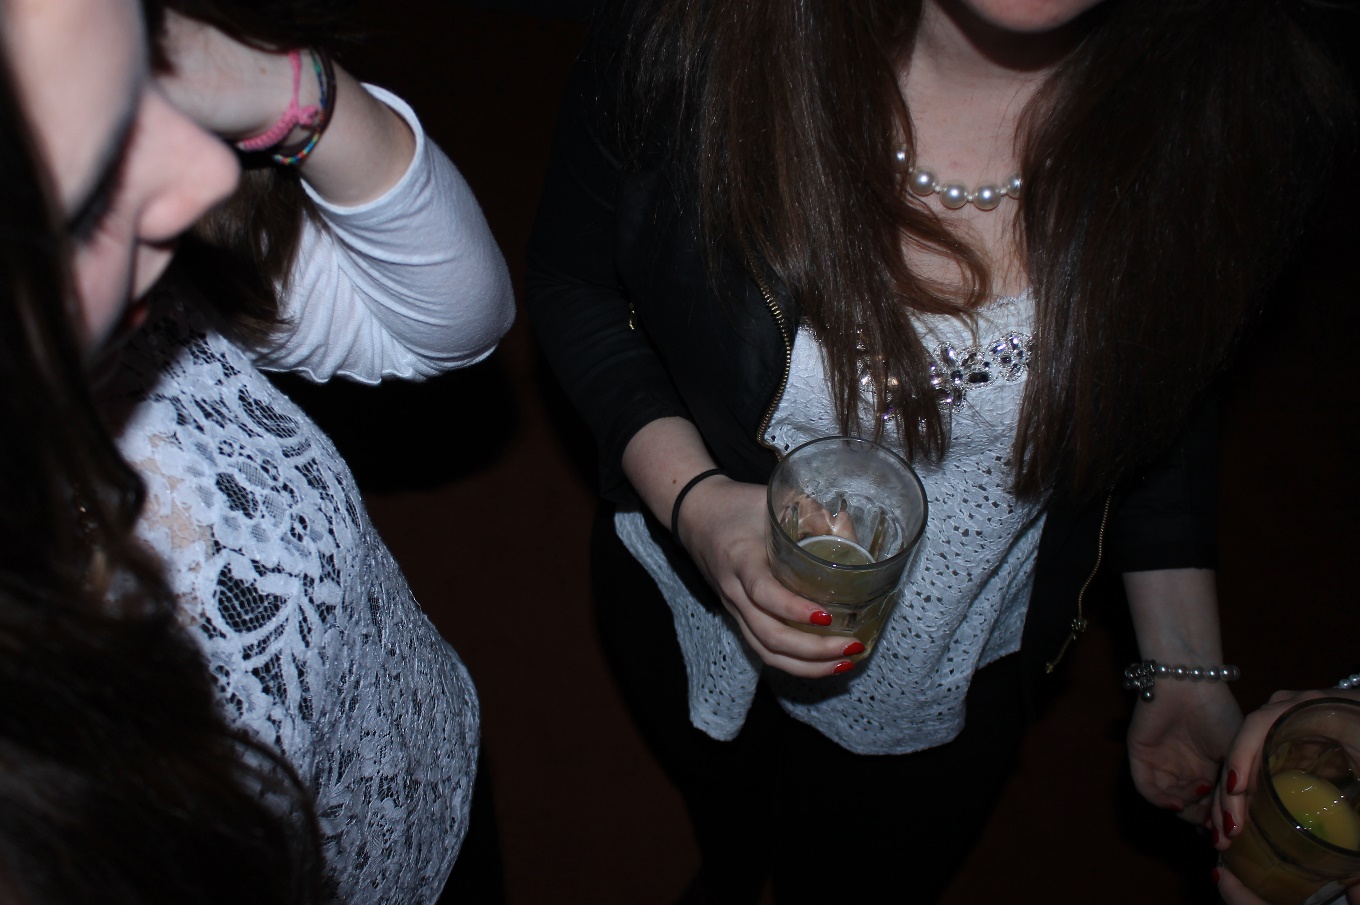 Photo of two girls holding drinks in a dark room.